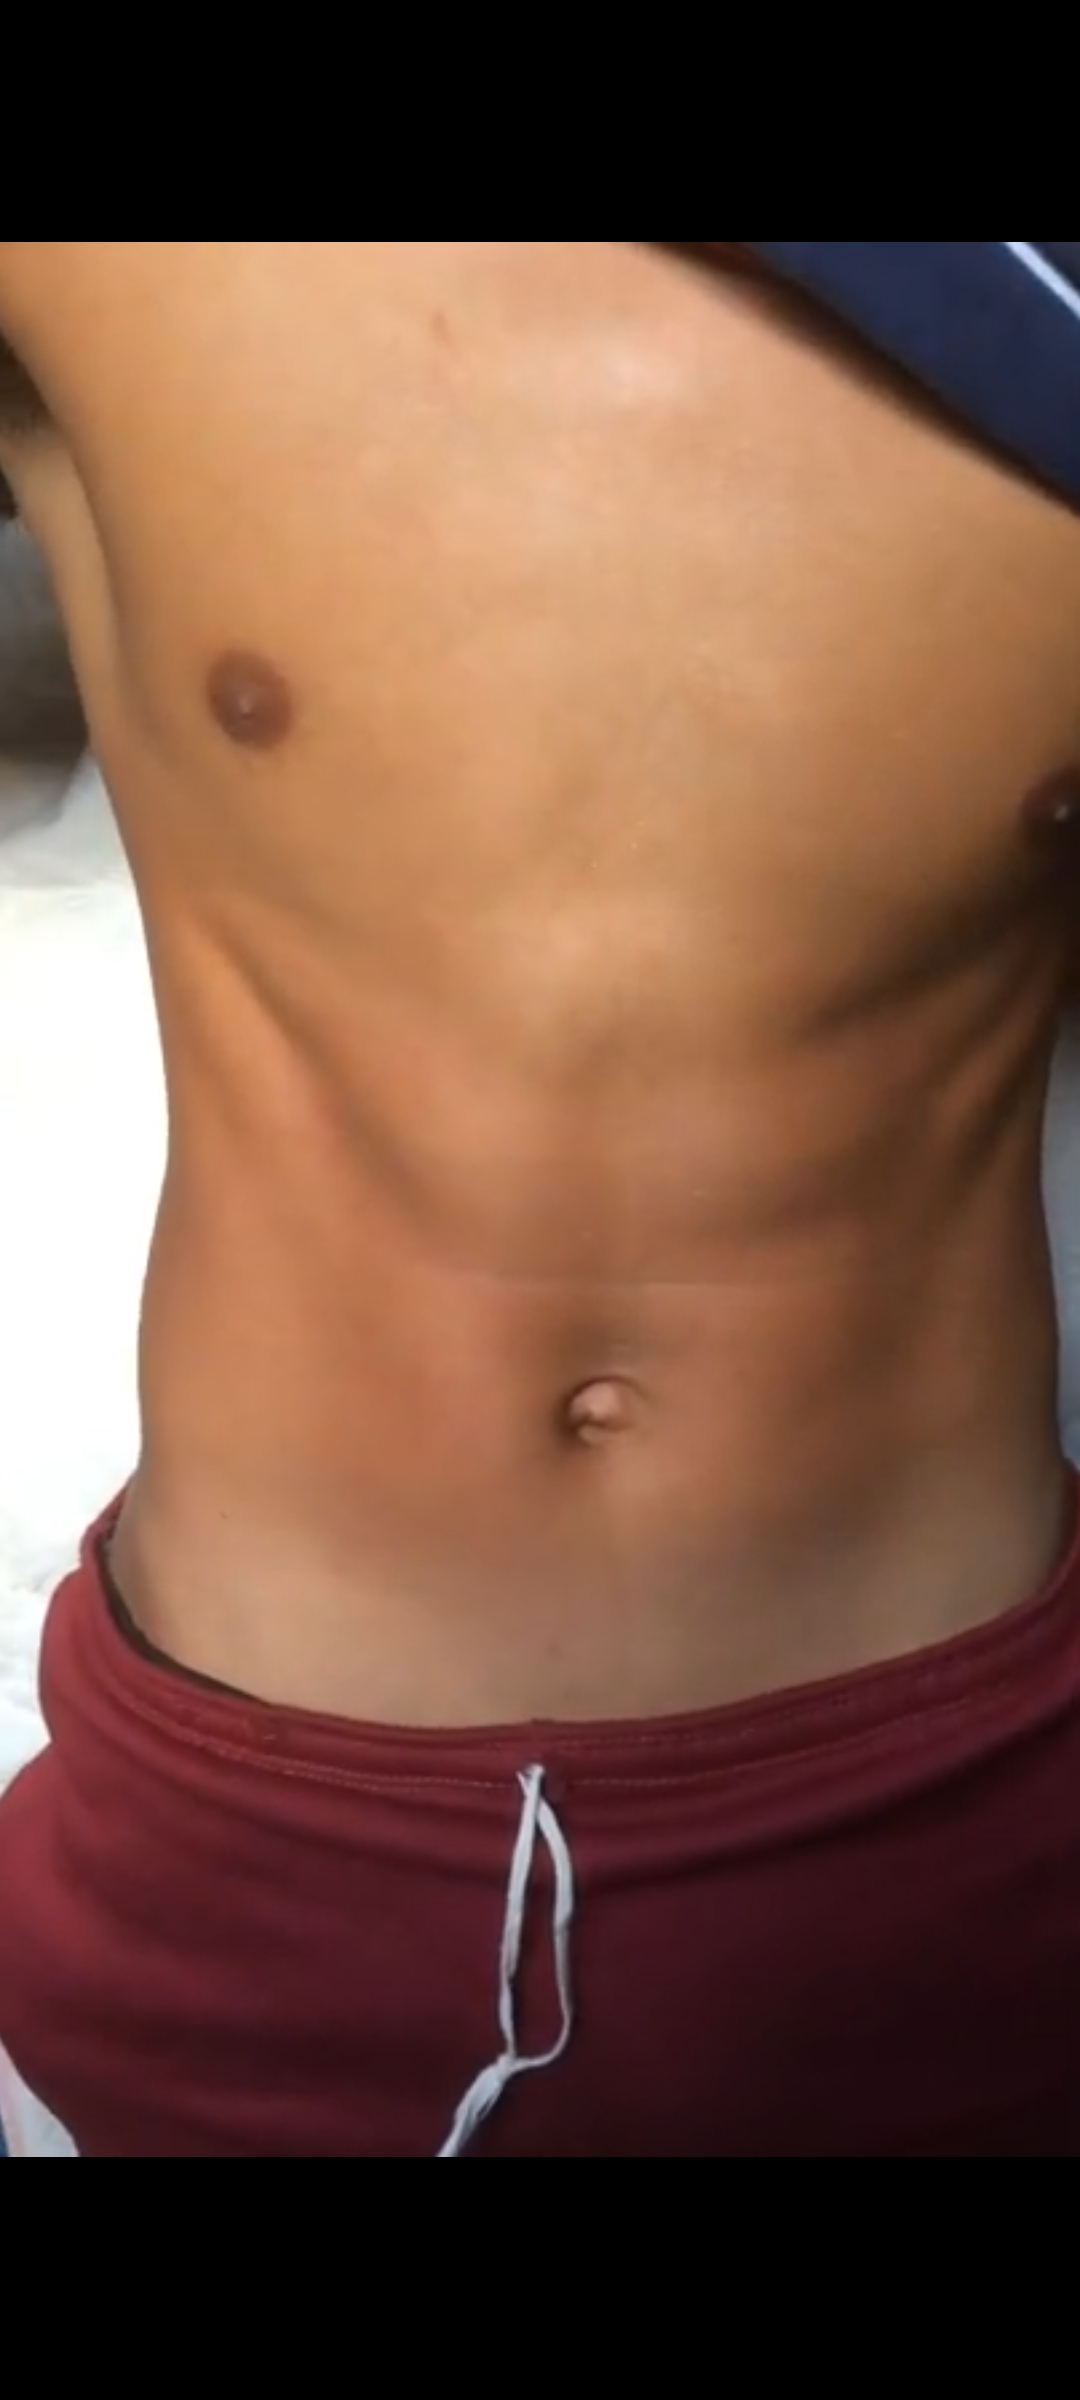 SHIRTLESS BOY OUTIE BELLY BUTTON PLAY